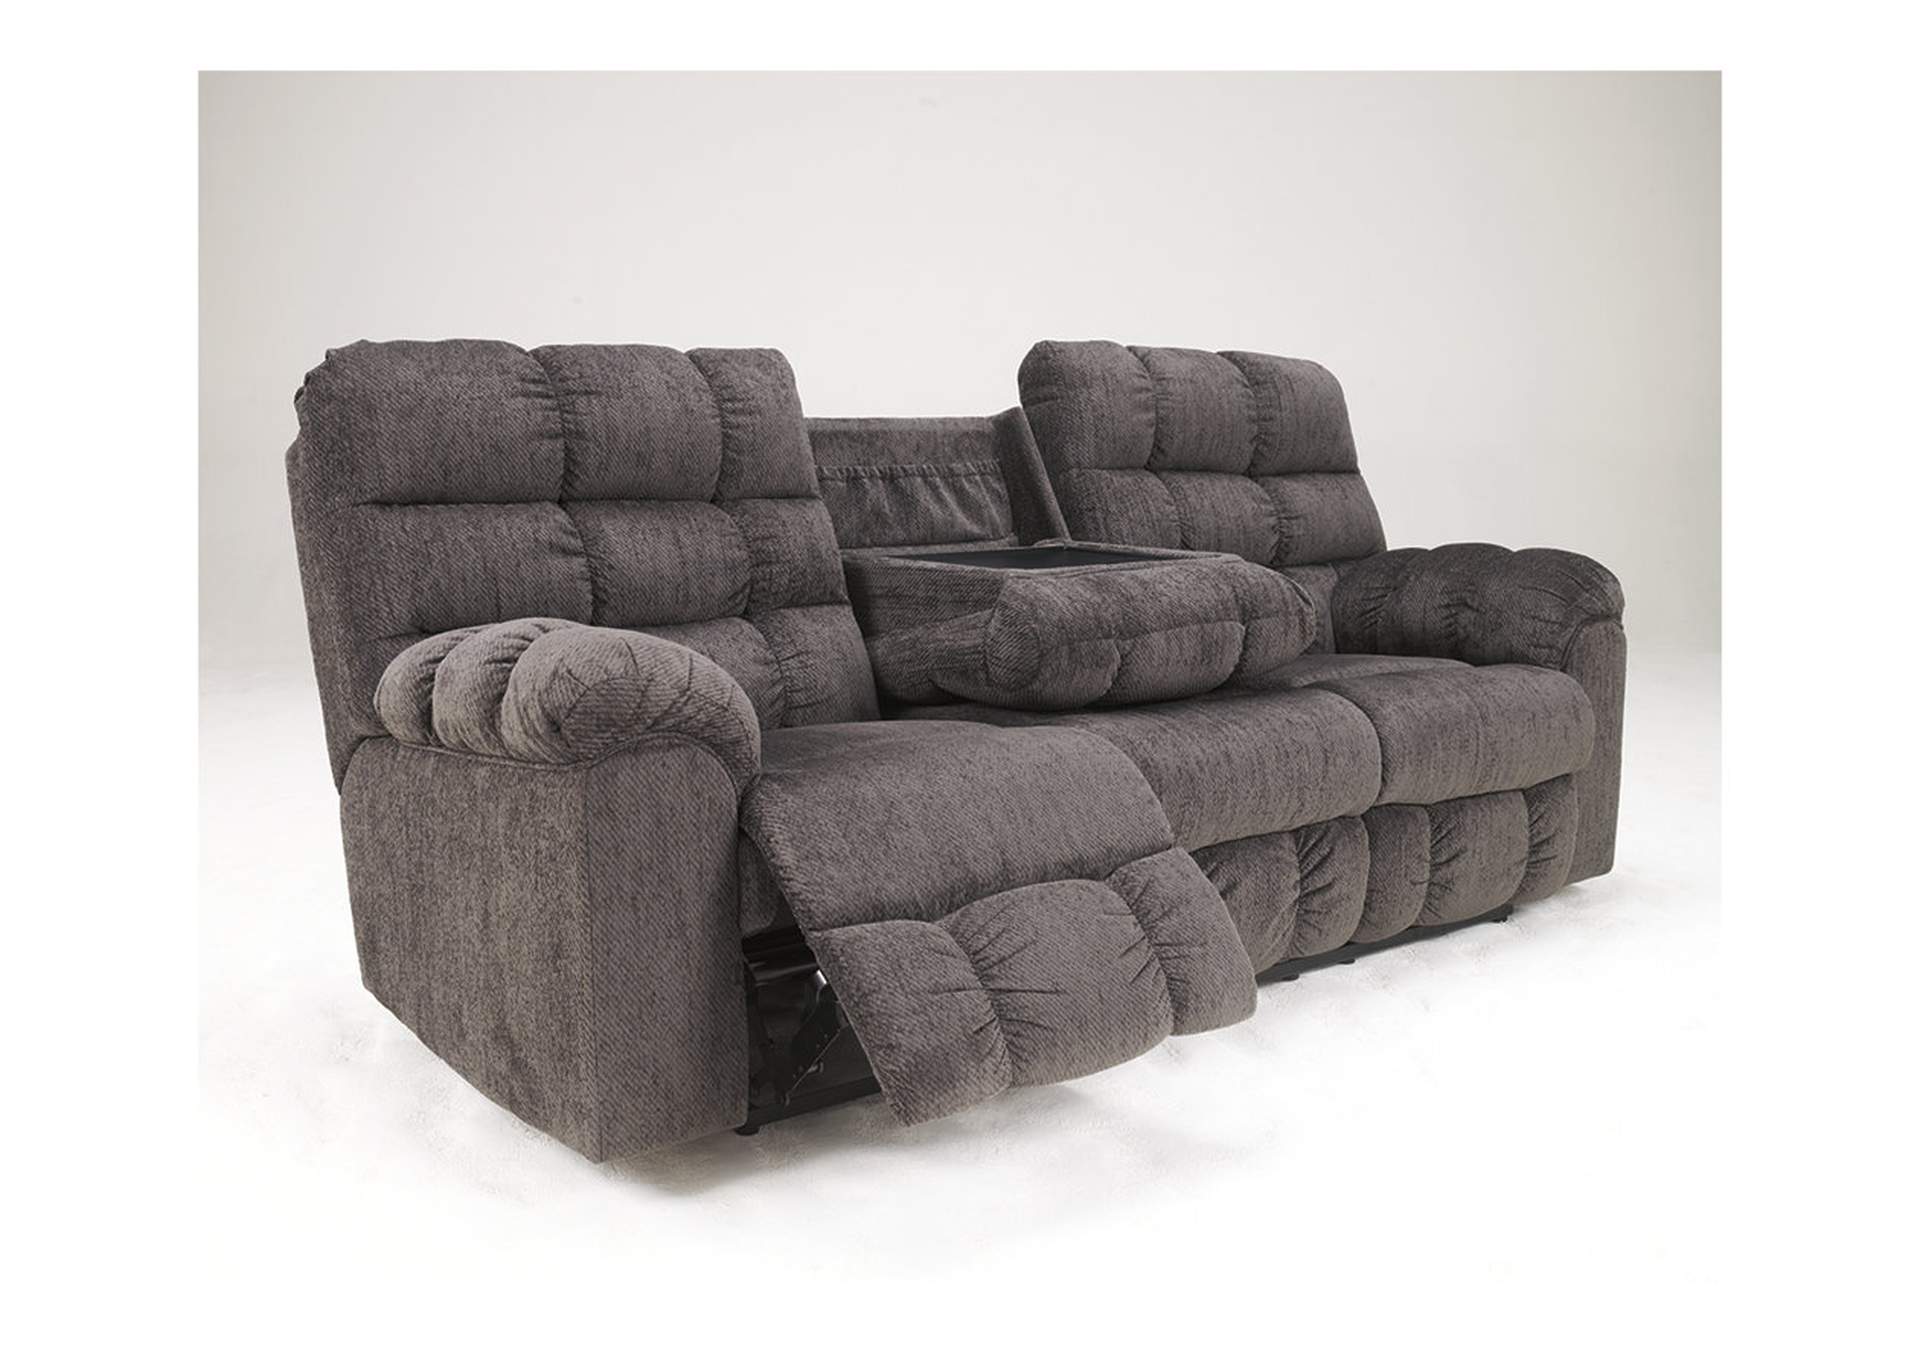 Acieona Reclining Sofa with Drop Down Table,Signature Design By Ashley